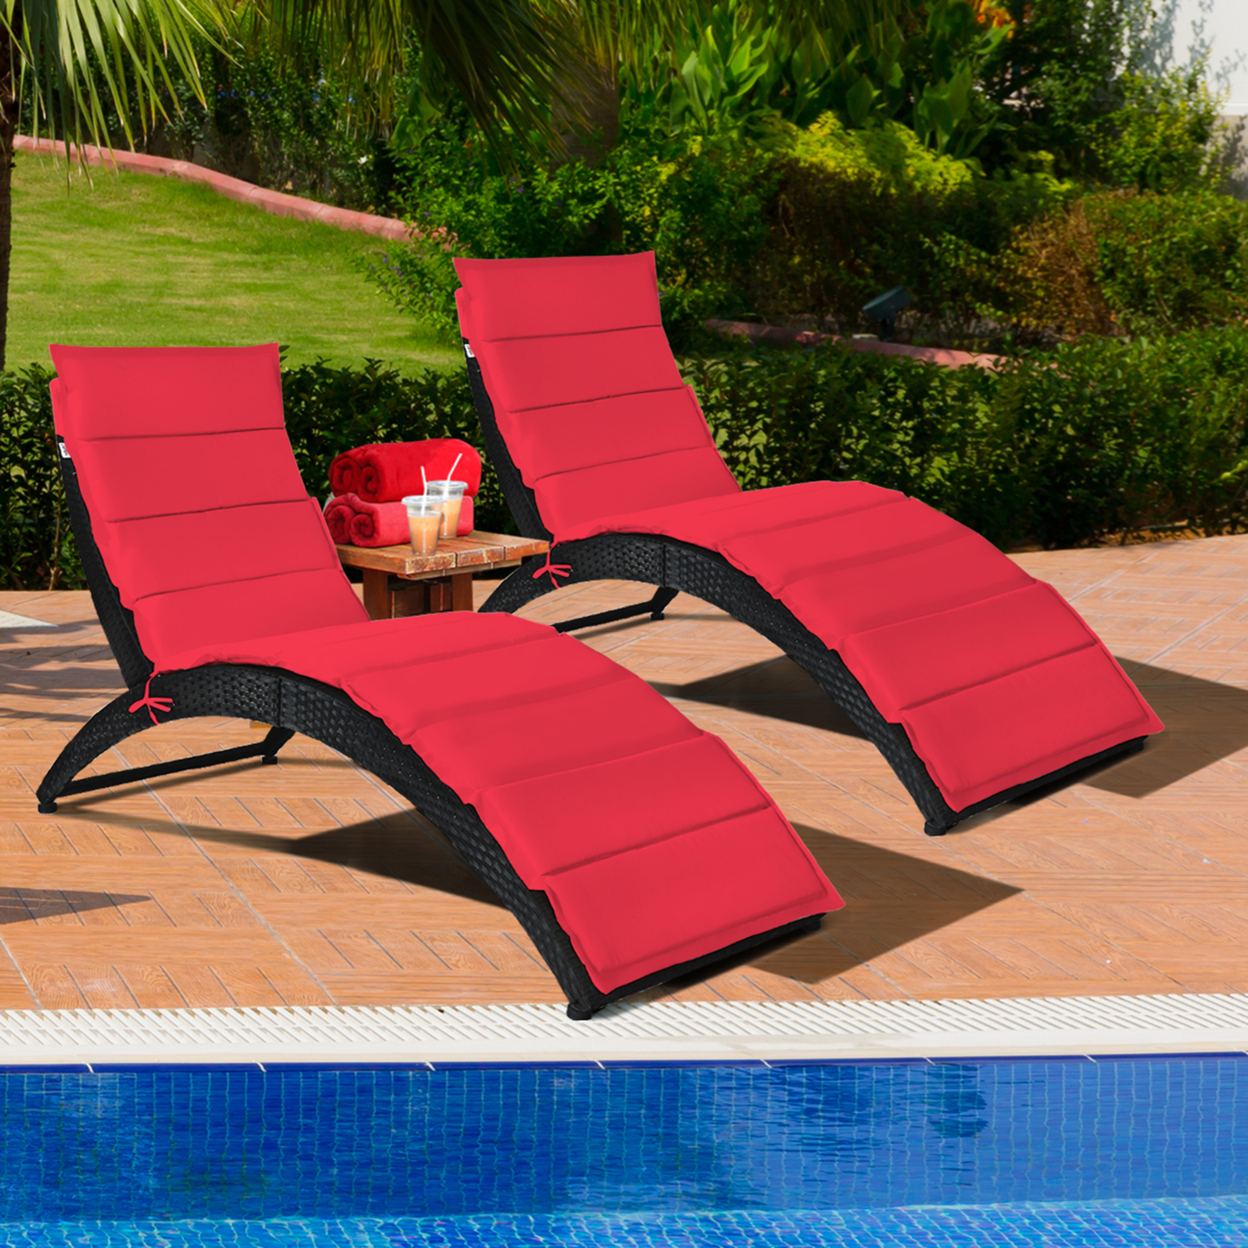 2PCS Foldable Rattan Wicker Chaise Lounge Chair W/ Red Cushion Patio Outdoor